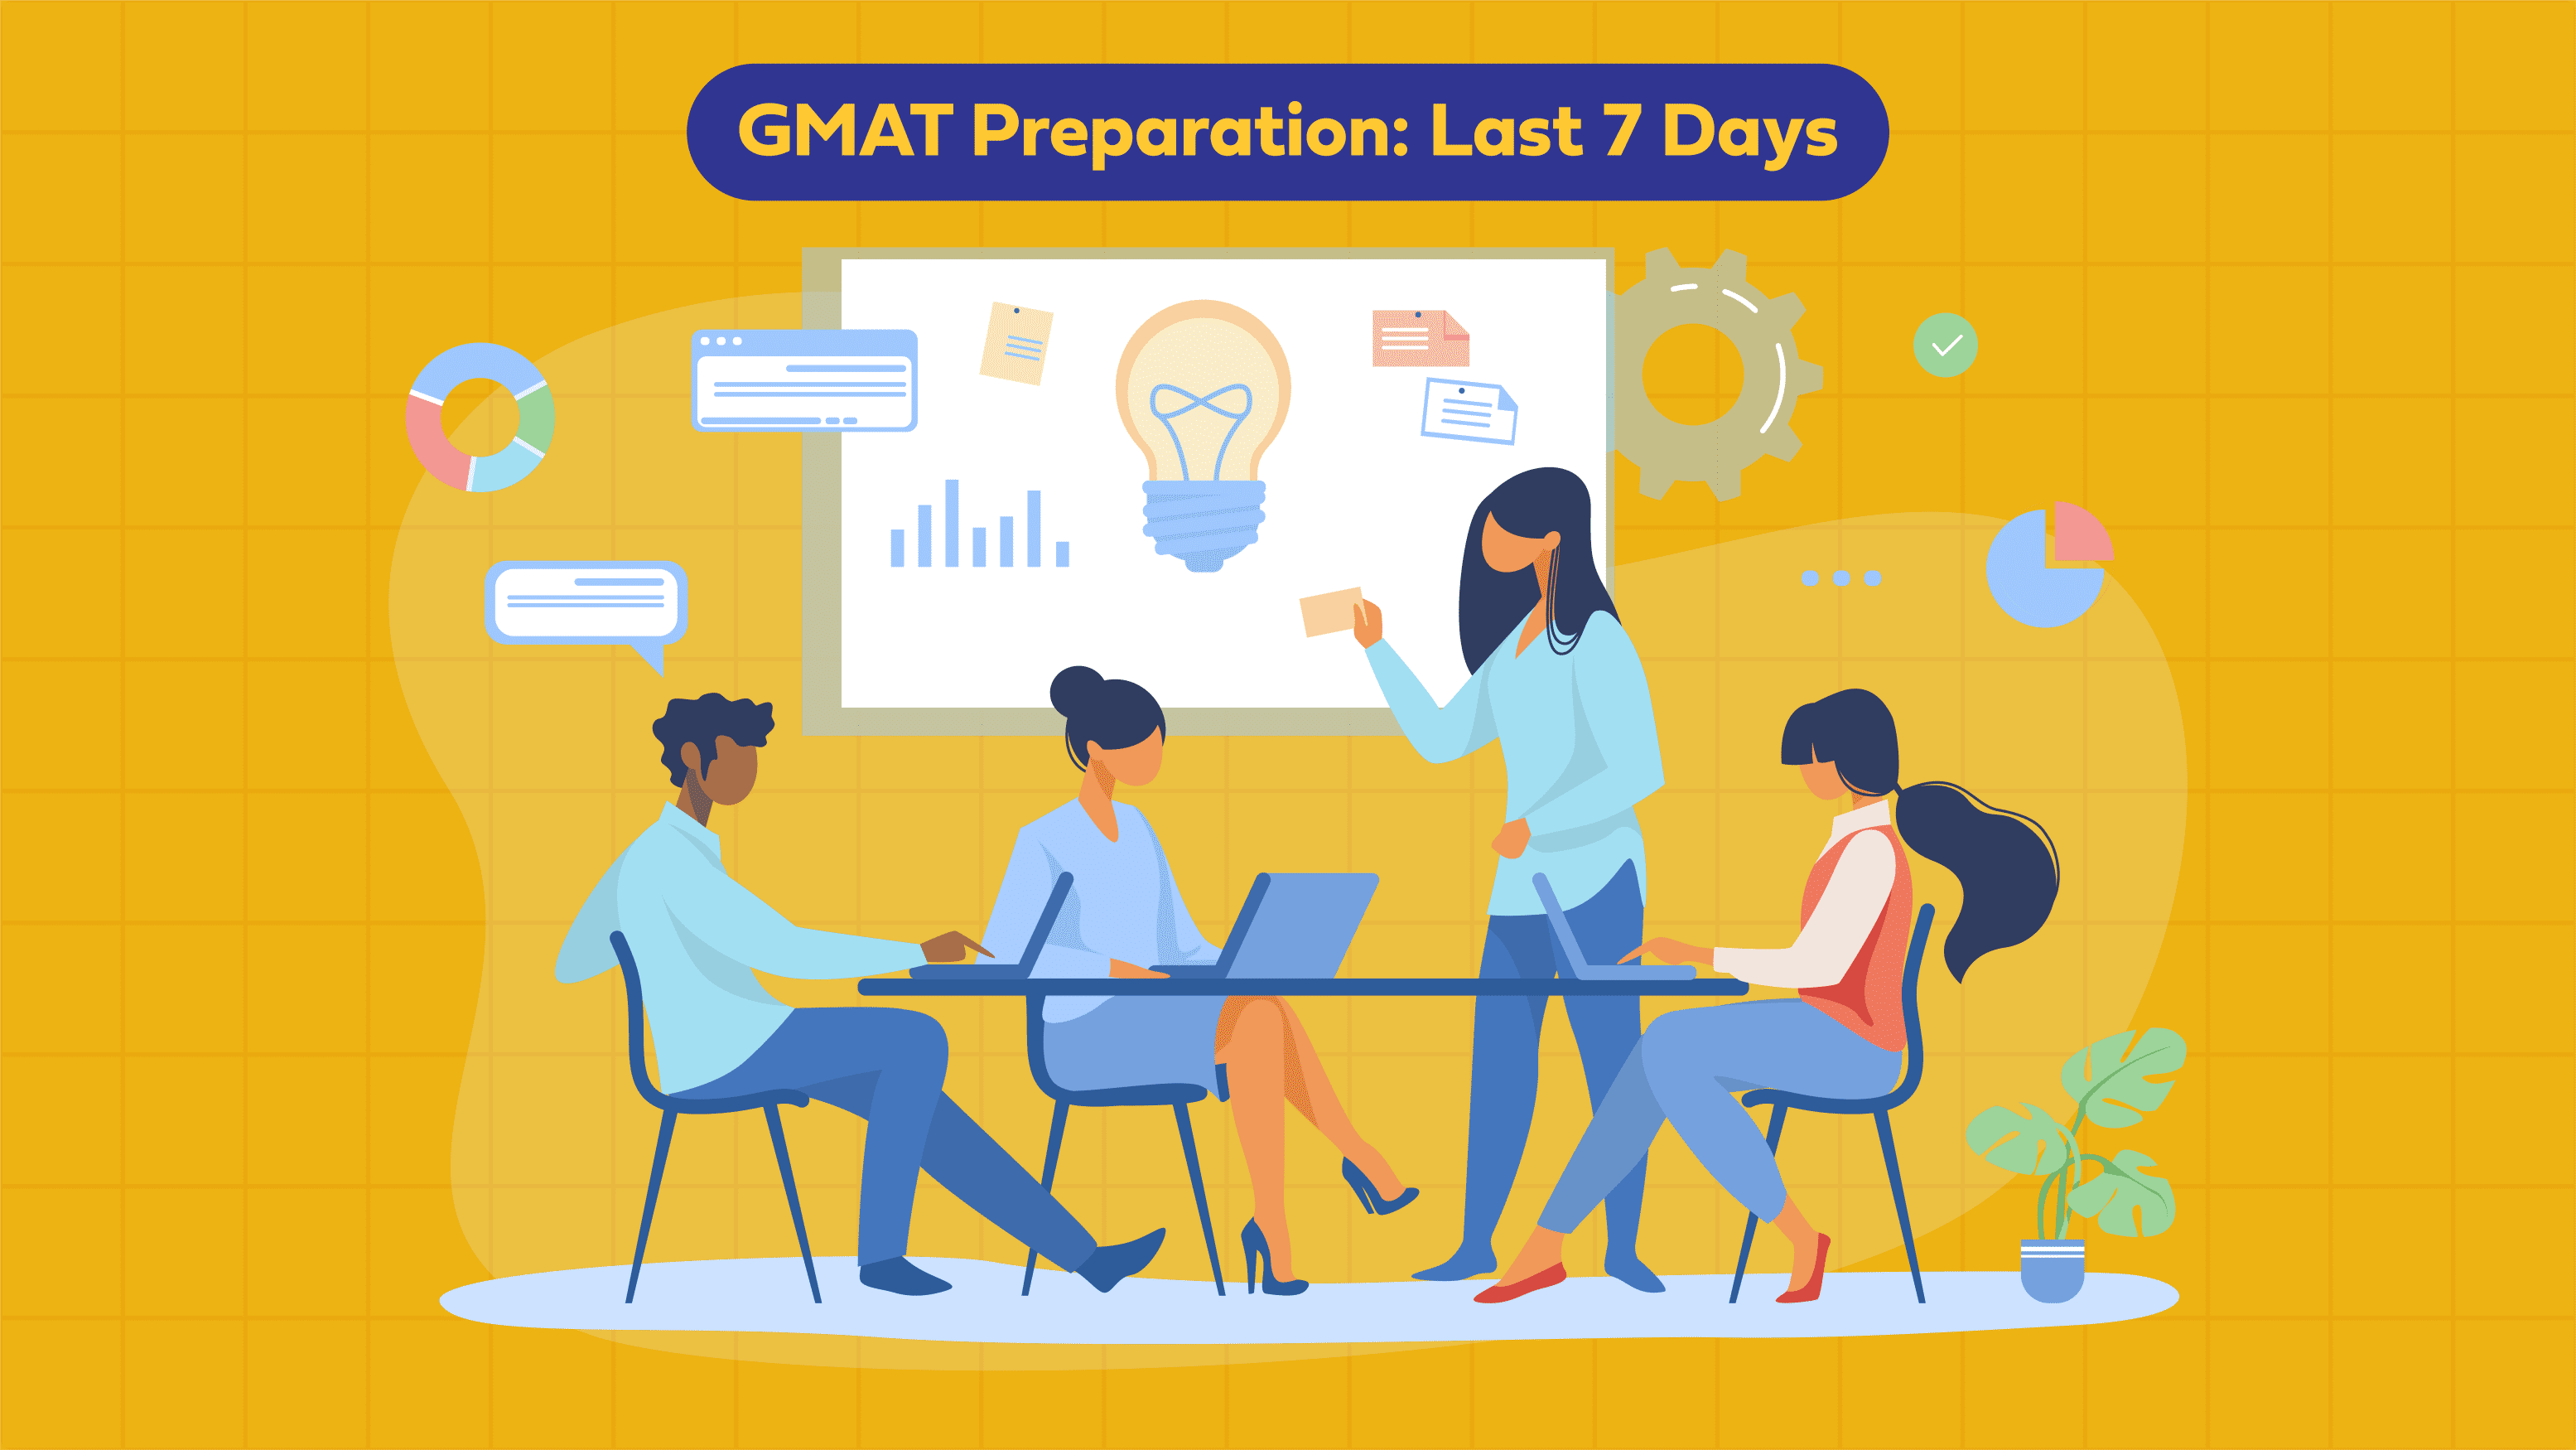 How to Study in the Last 7 Days Before Your GMAT?